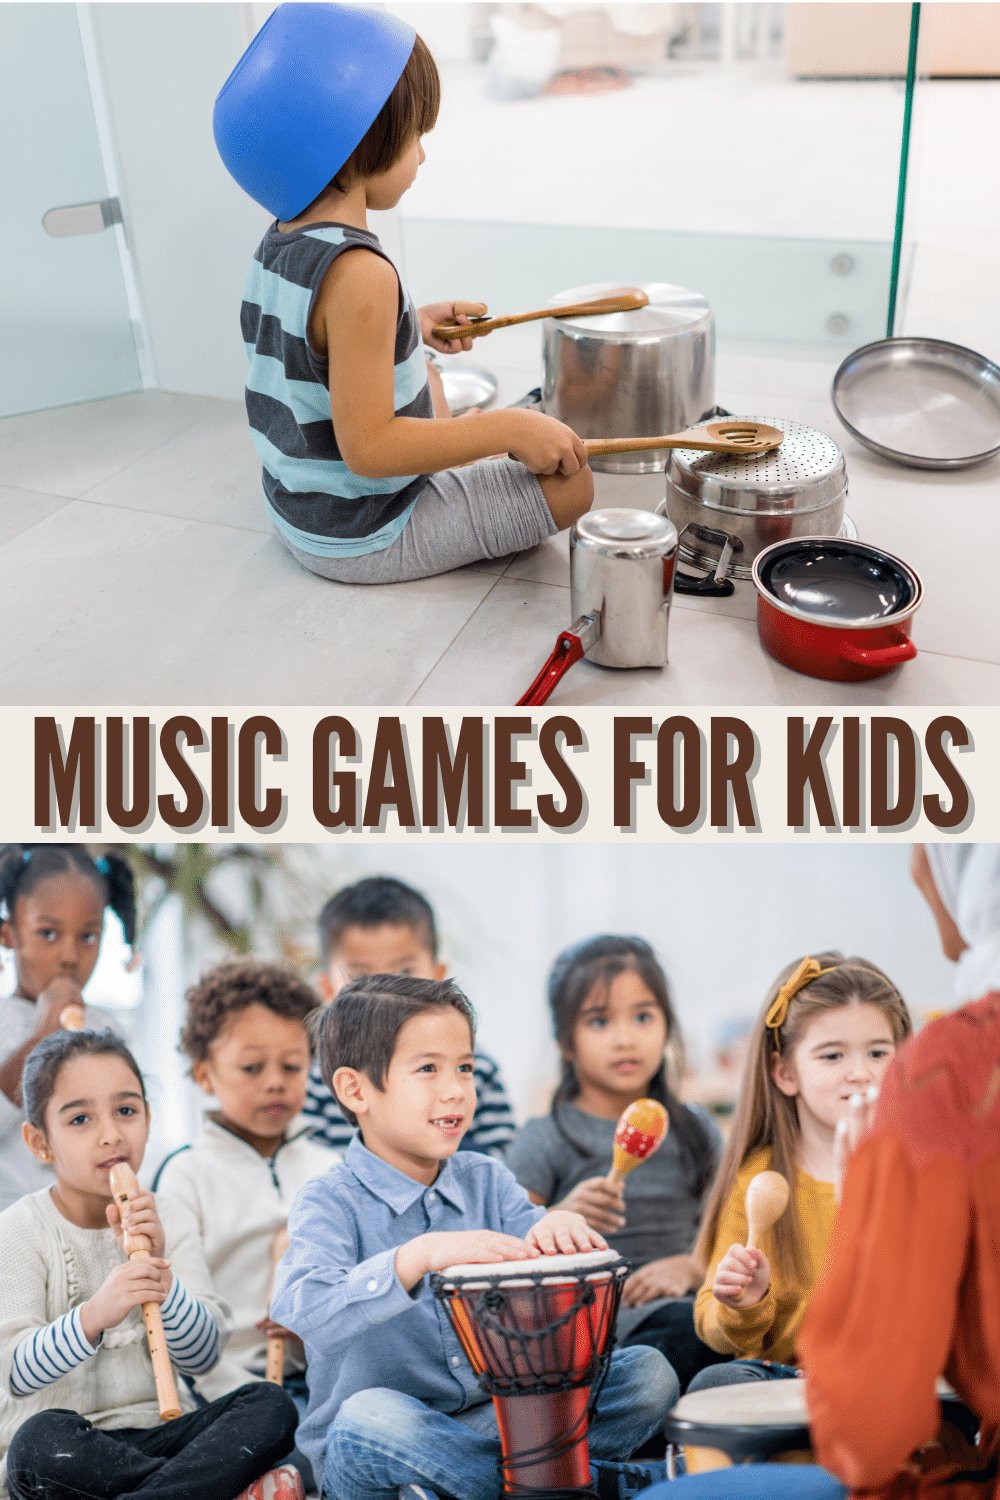 This is such a wide variety of fun music games that are fun for kids of all ages! Perfect for keeping kids busy, family or classroom fun, or to foster a love of music and art. Your kids will have a ton of fun with these games! #kidsactivities #musicactivities #games via @wondermomwannab